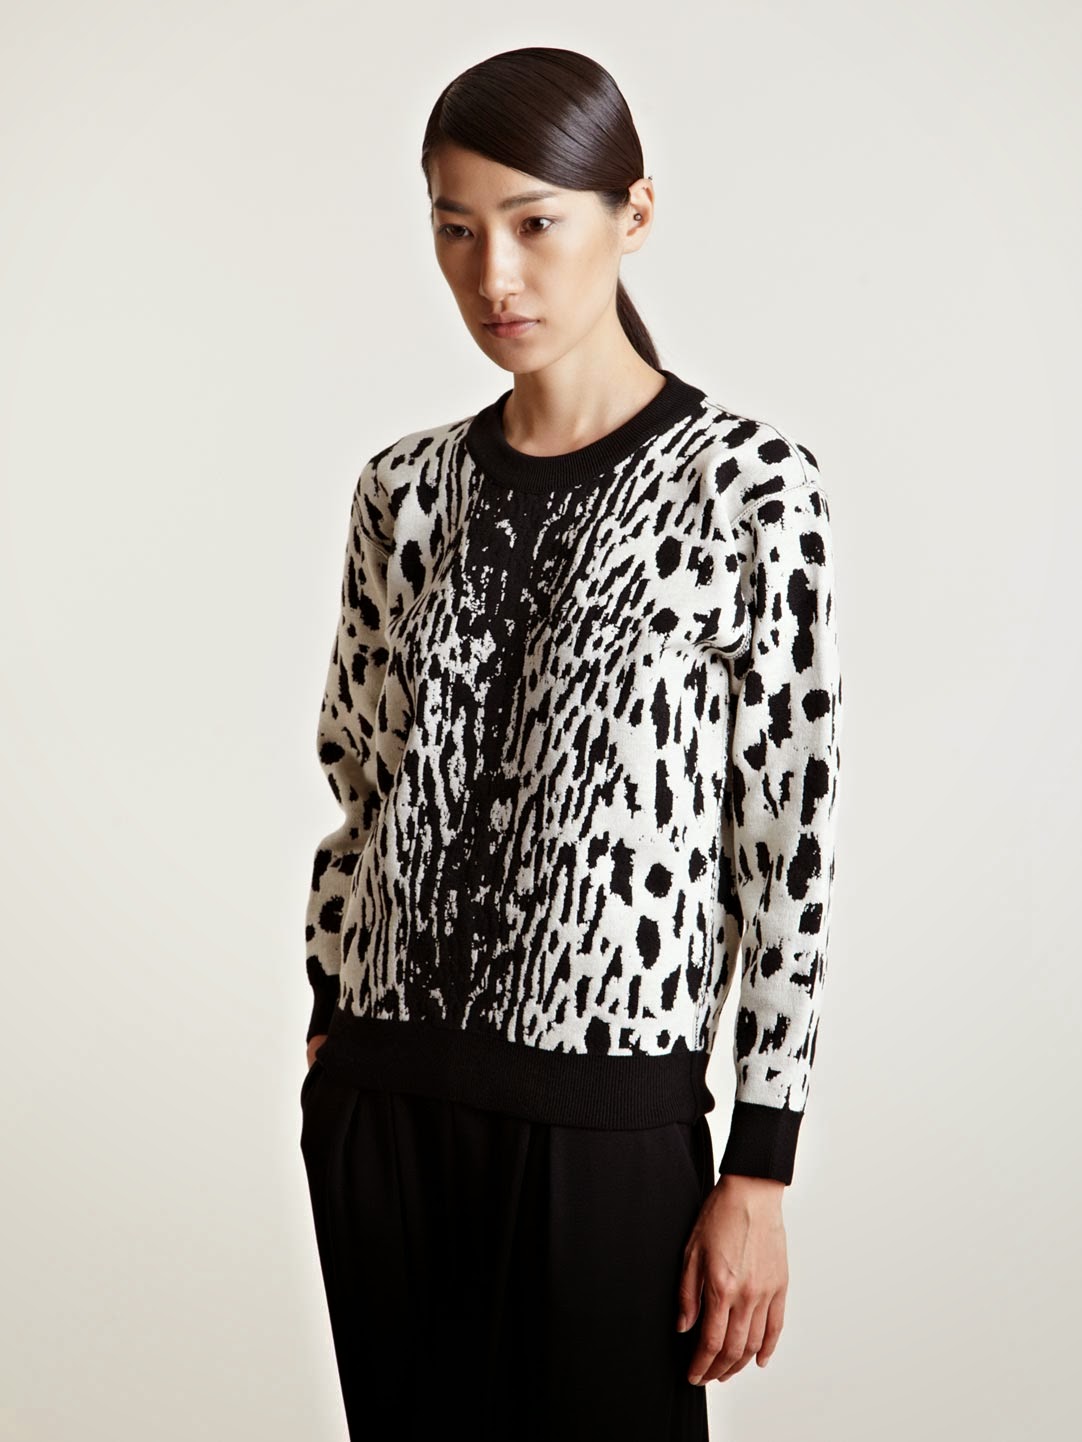 TeeWhy-Hive: Helen Lasichanh In Lanvin Leopard Print Sweater and ...